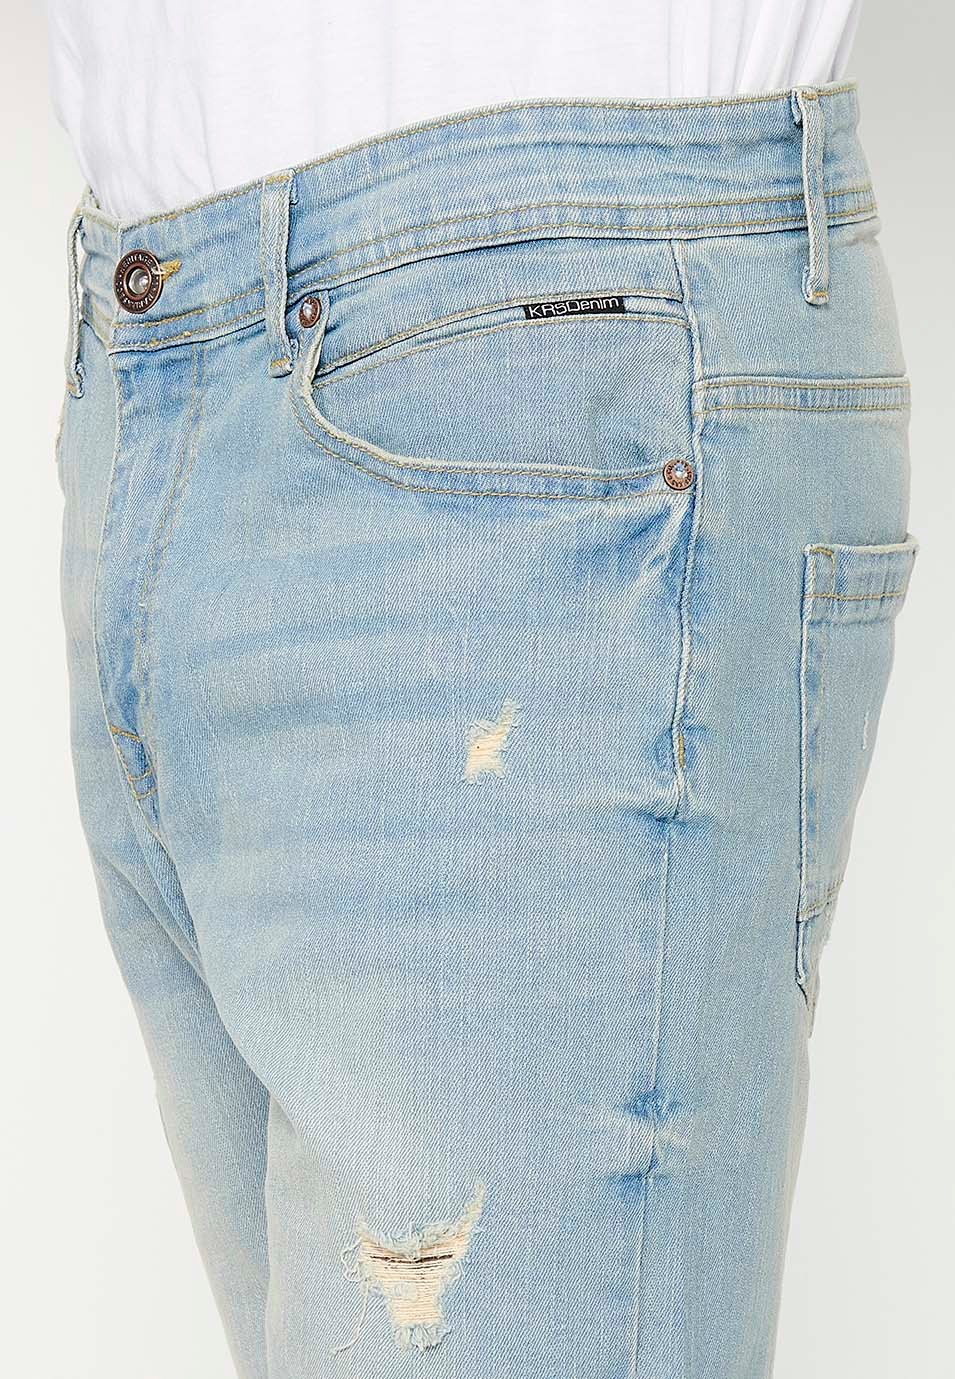 Shorts with turn-up finish and front closure with zipper and button and five pockets, one blue pocket pocket for men 5